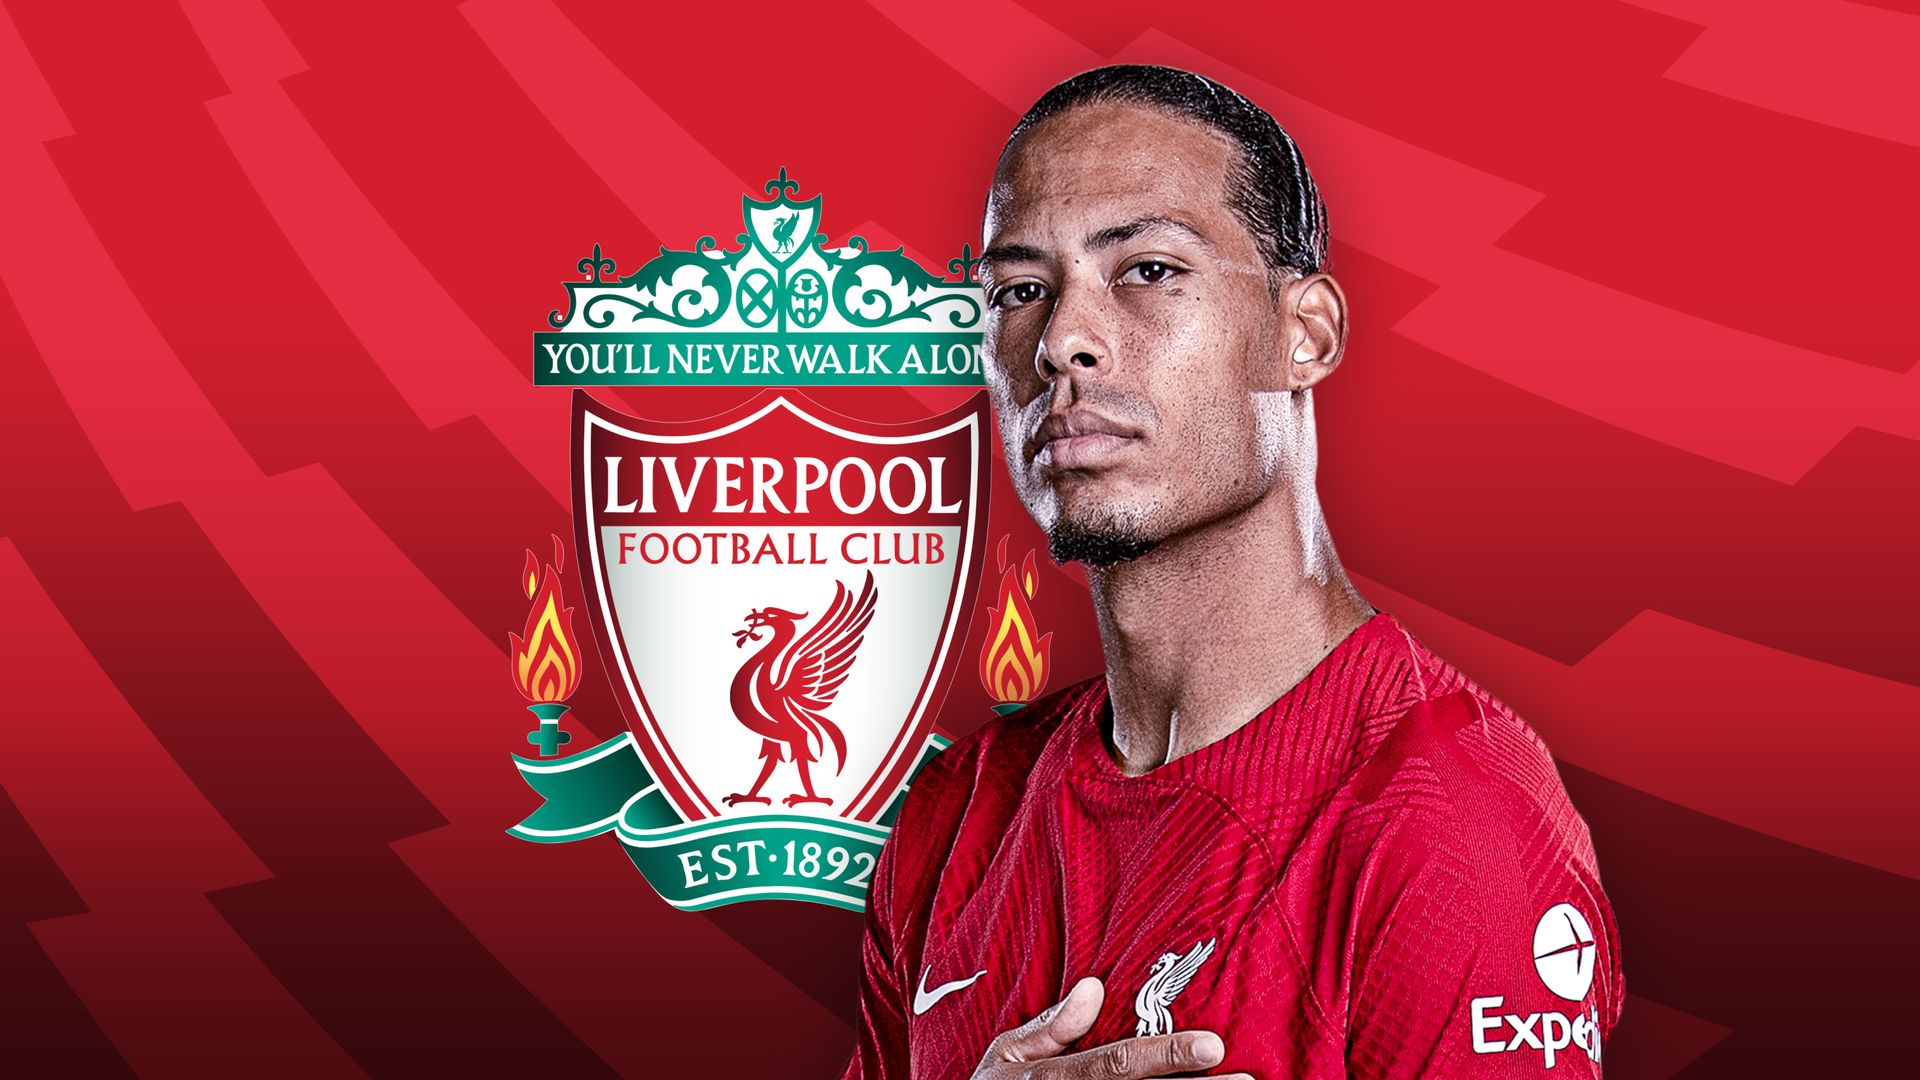 Is Van Dijk out of form or on the decline?